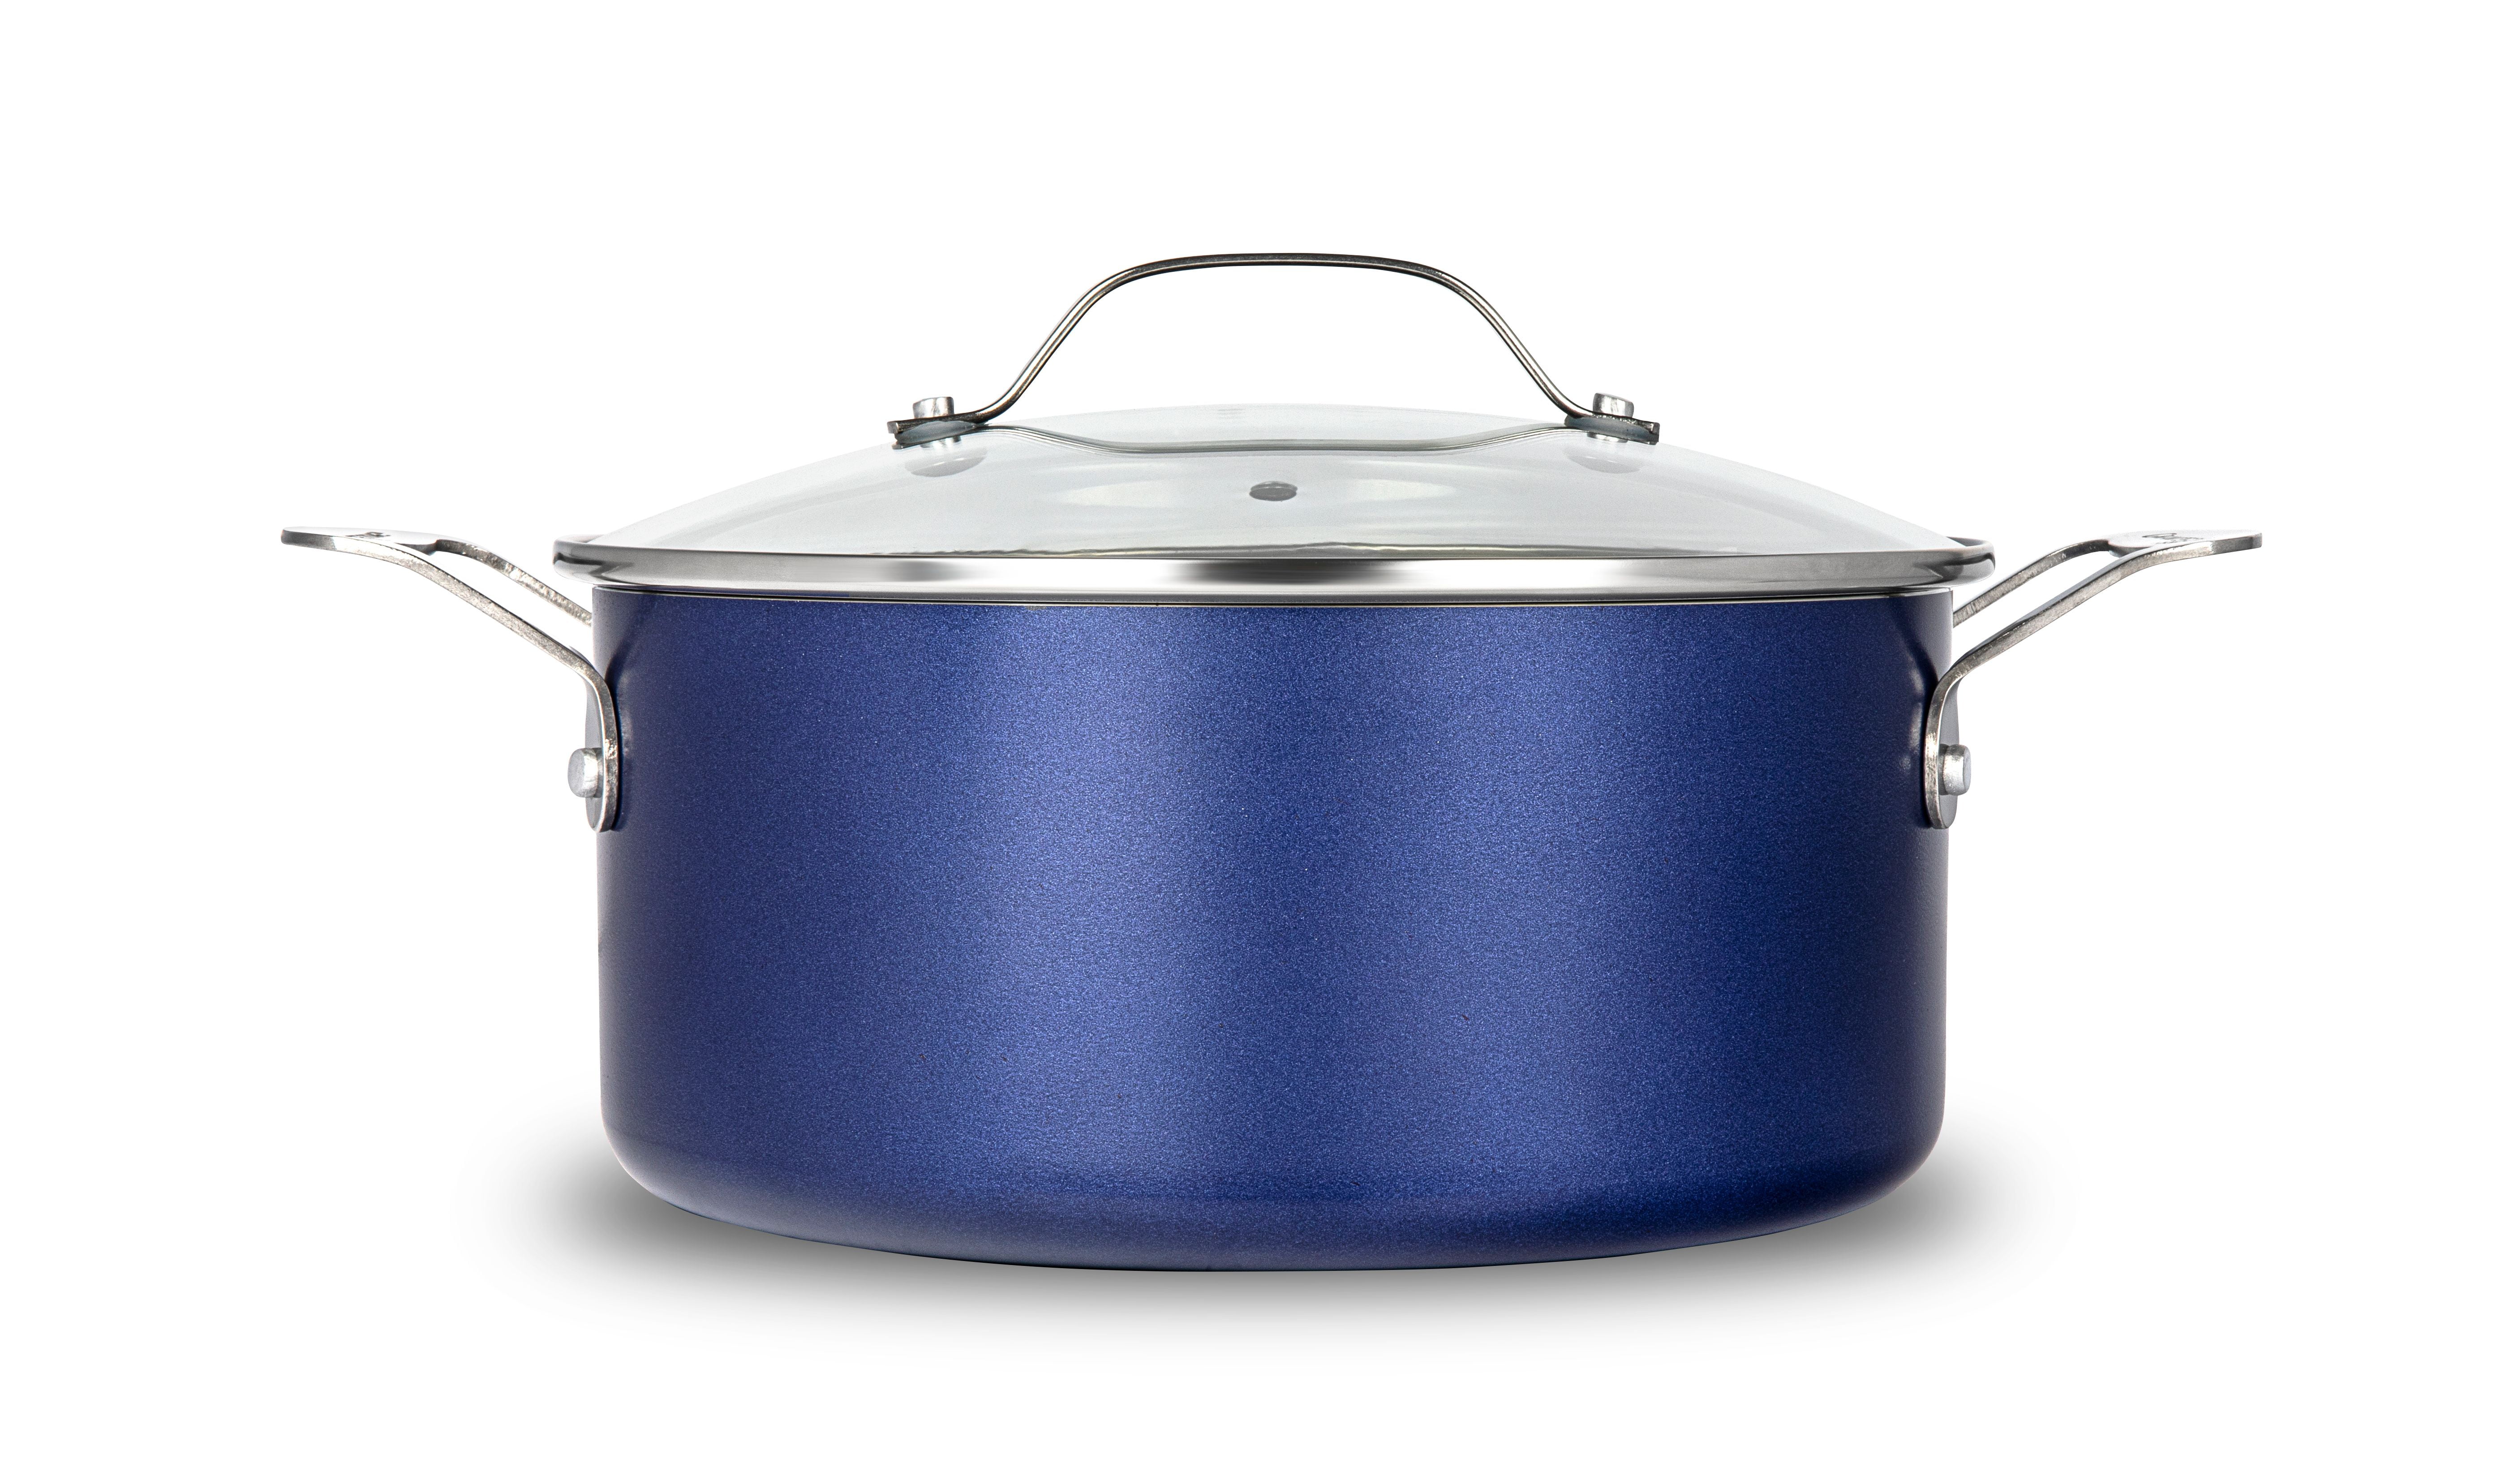 5QT Stock Pot with Lid - Nonstick Saucepan Cooking Pot Pasta Pot with USA  Blue Gradient Granite Derived Coating, Heat-resisted Silicon